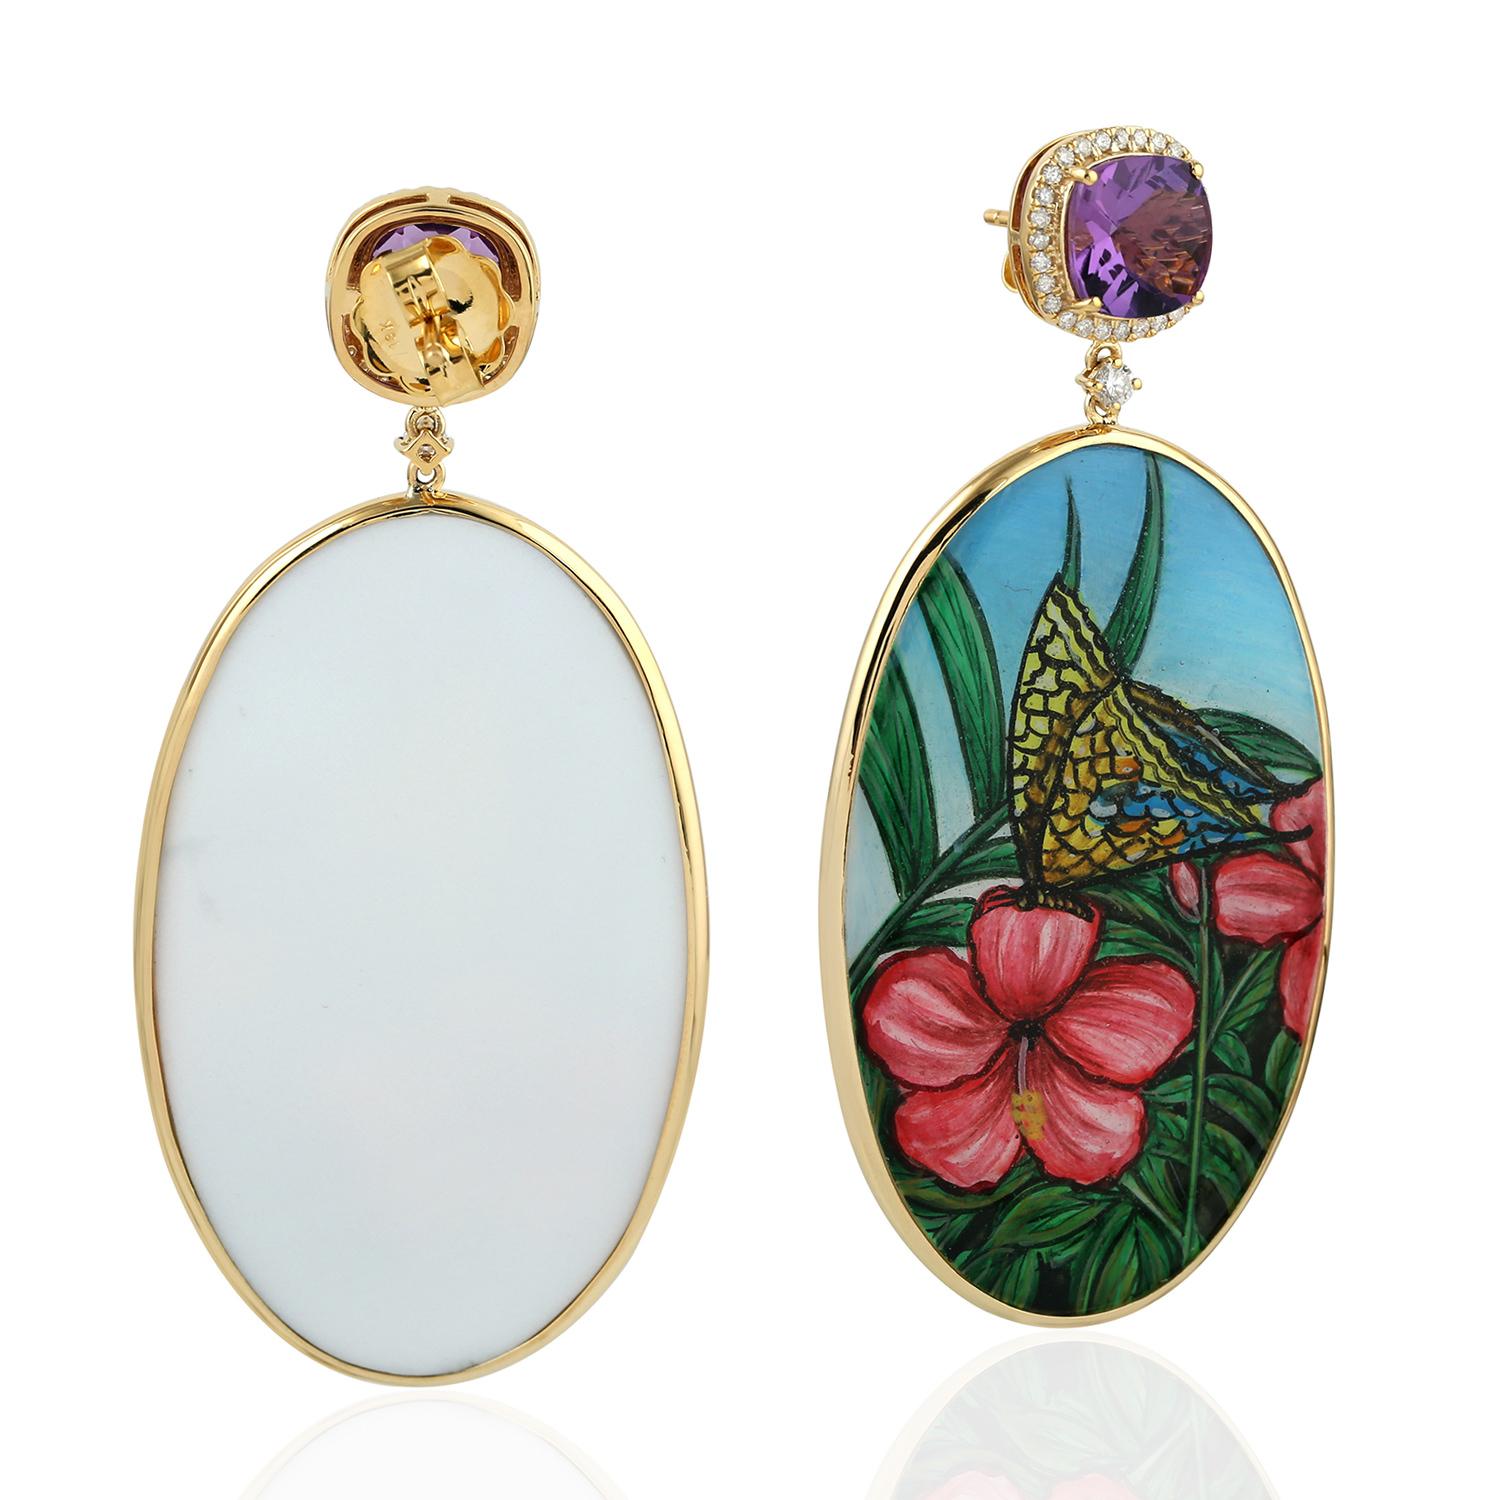 Sweet this oval shape Hand Painted Butterfly and Flower Bakelite Earring in 18k Yellow Gold  with amethyst and diamond is perfect for Mother's Day gift or any occasion.


18kt Gold: 8.005gms
Diamond: 0.50cts
Amethyst: 5.27cts
Bakelite: